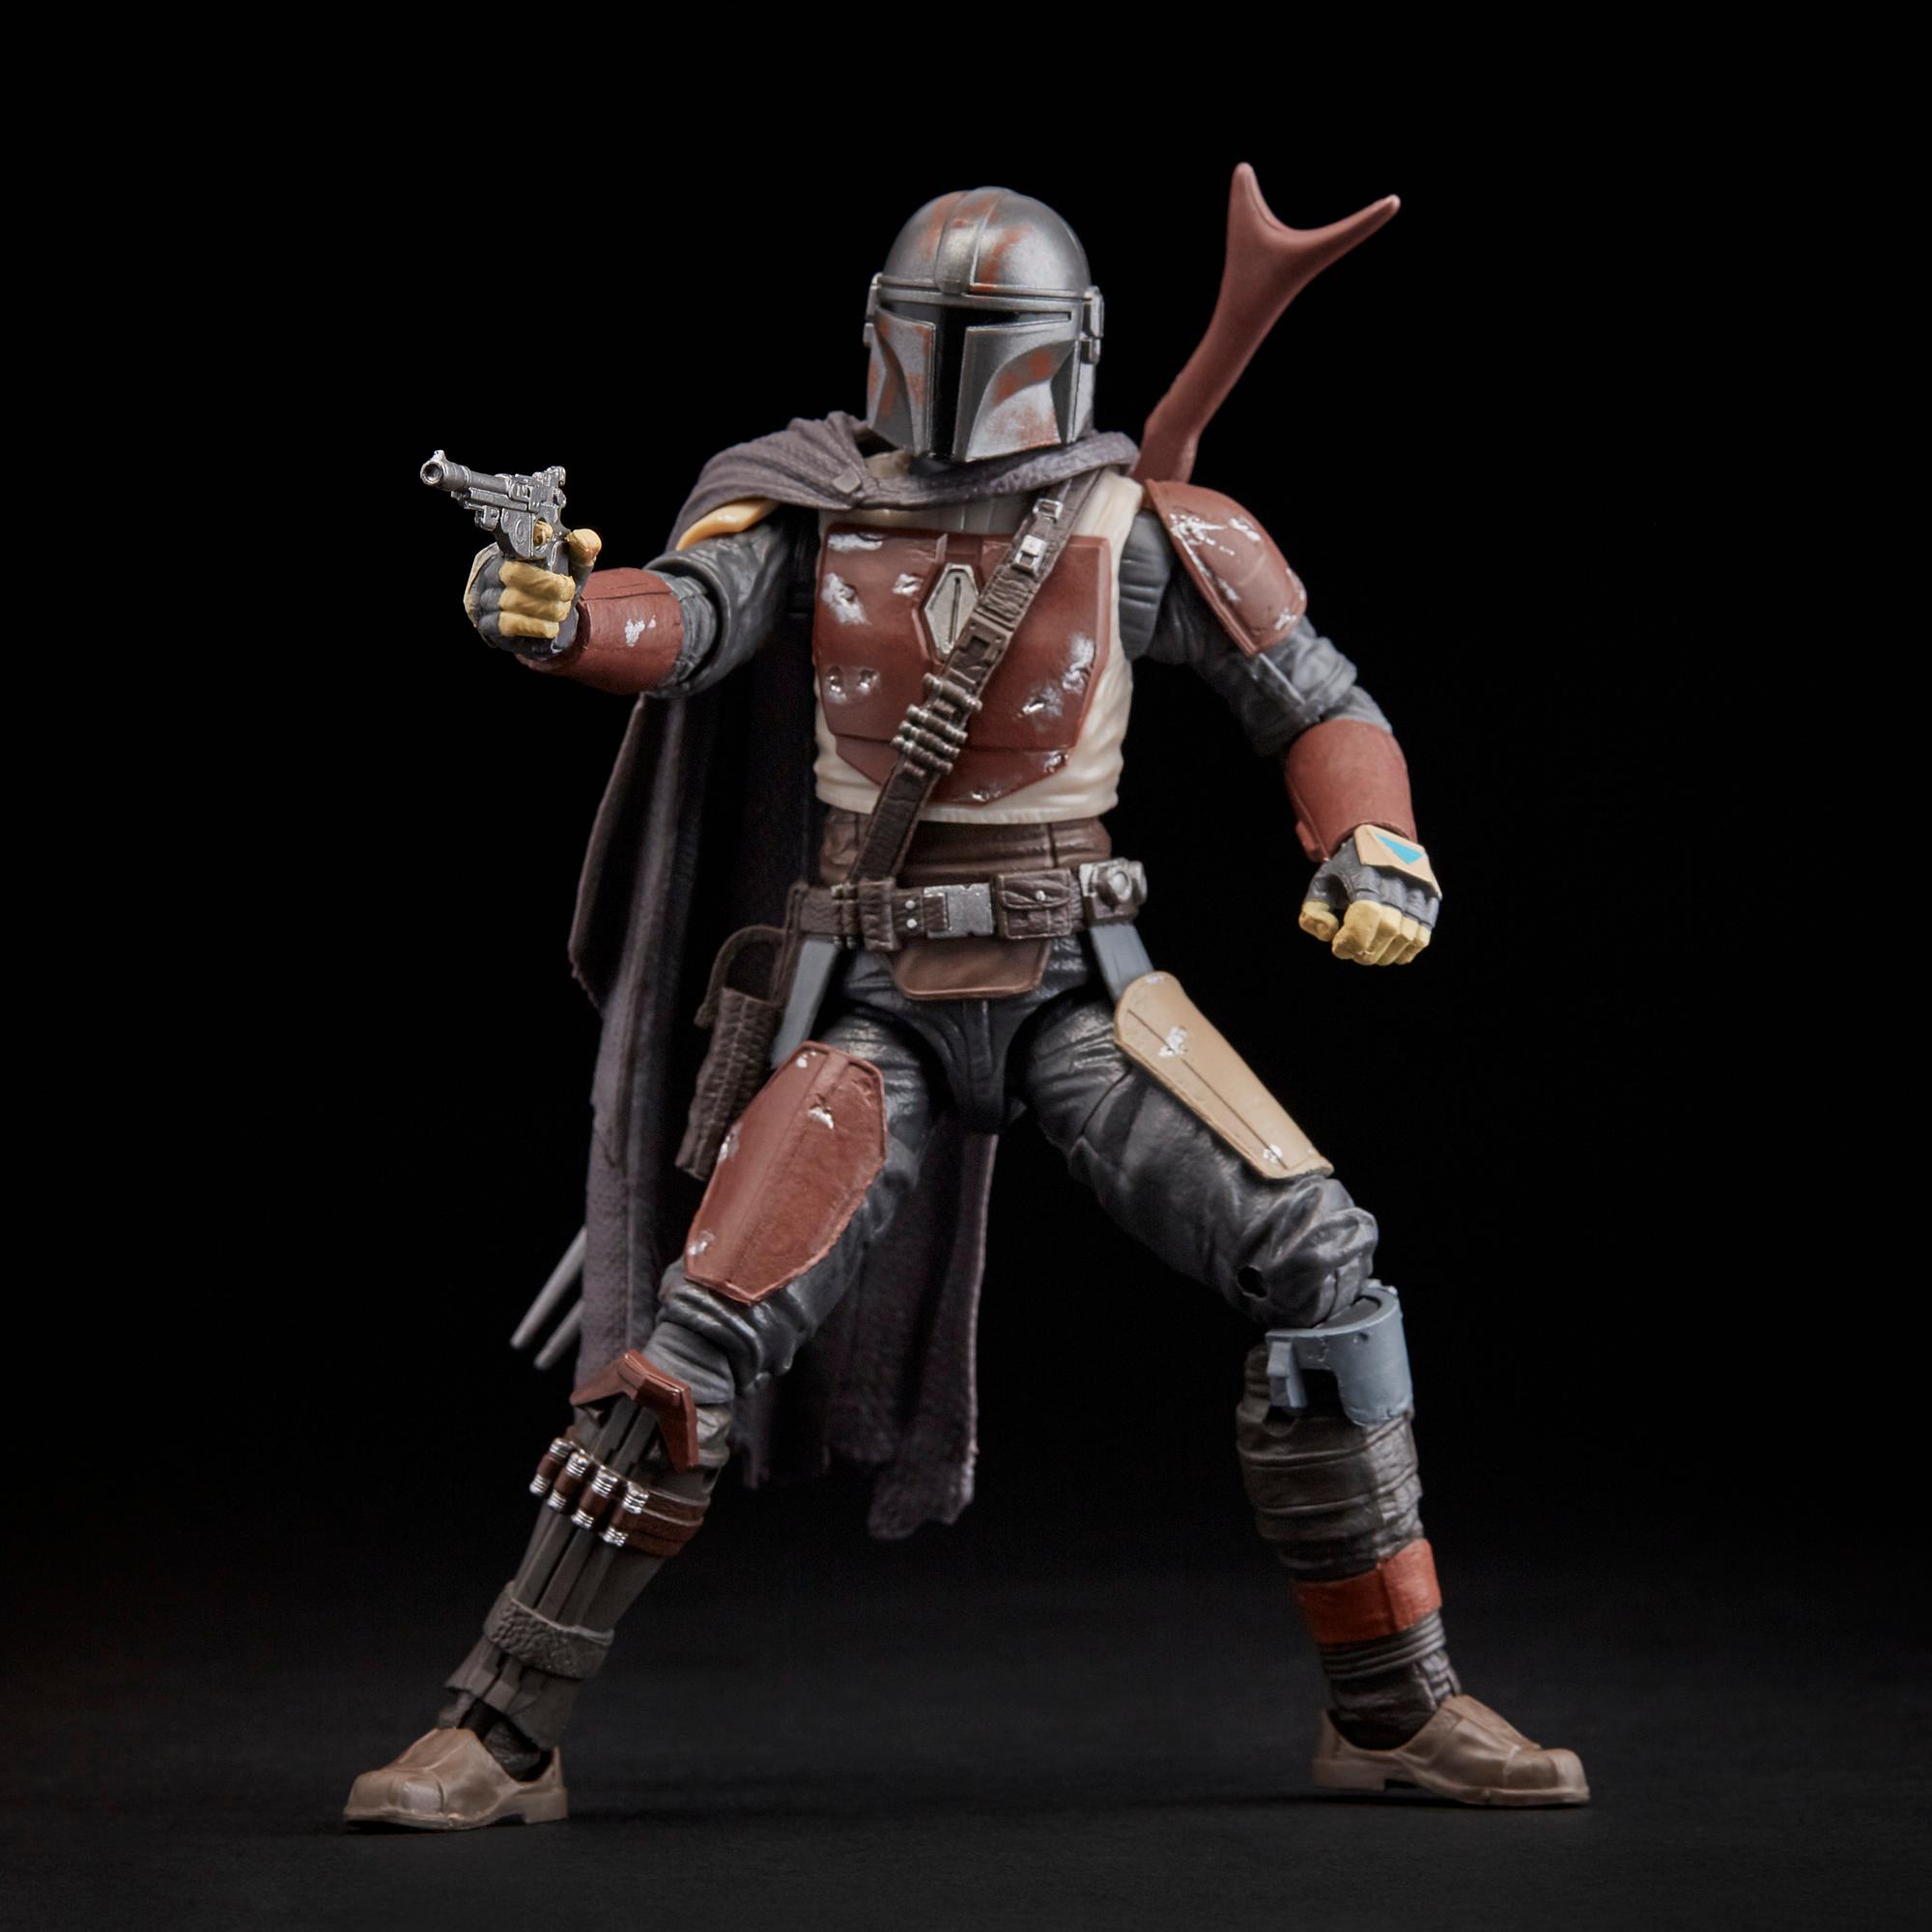 F1305 for sale online Hasbro Black Series The Mandalorian 6 inch Action Figure 